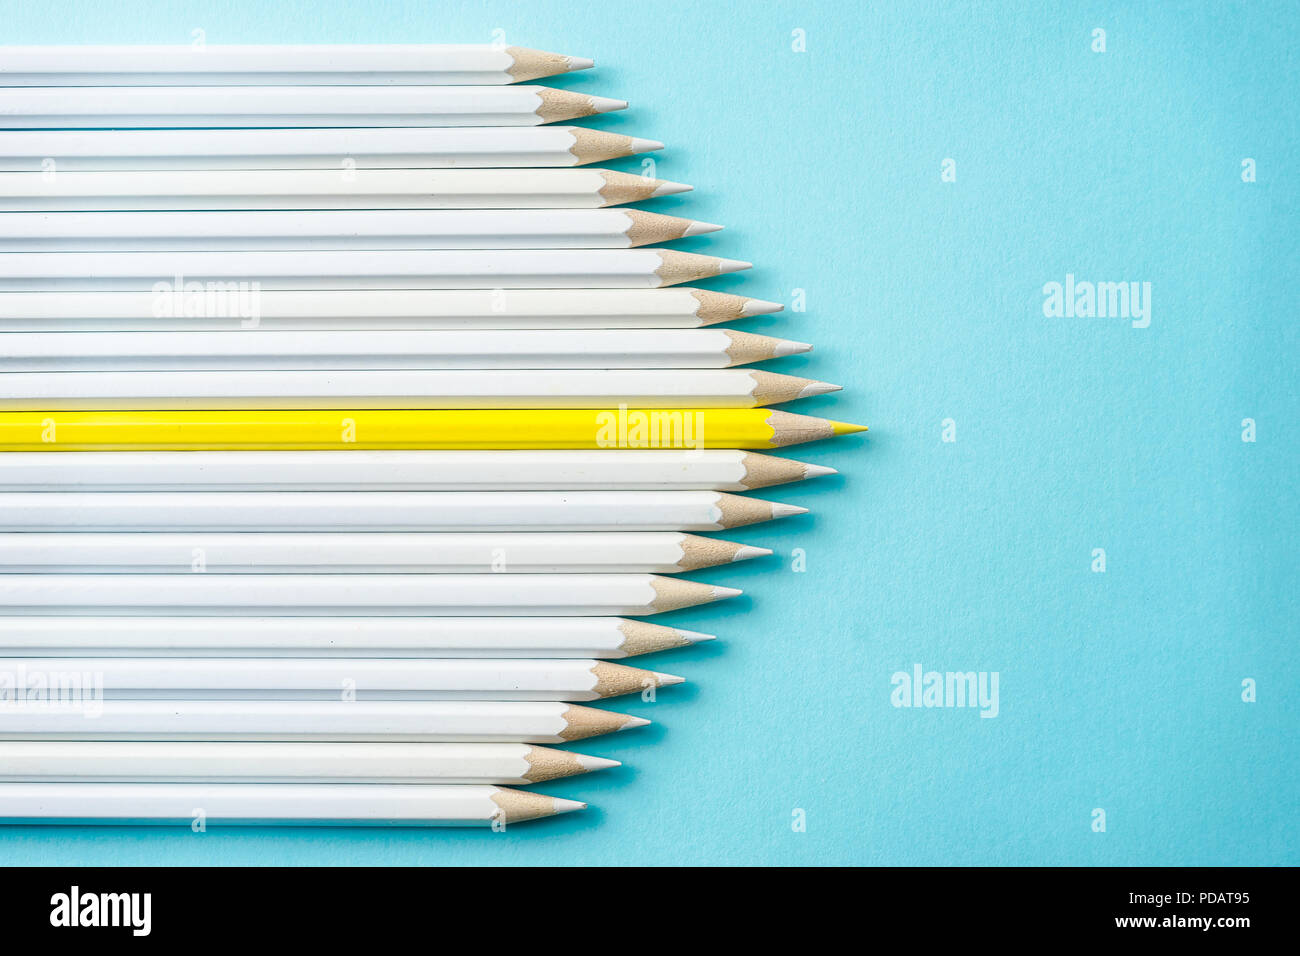 Business concept - lot of white pencils and one color pencil on blue paper background. It's symbol of leadership, teamwork, united and communication. Stock Photo